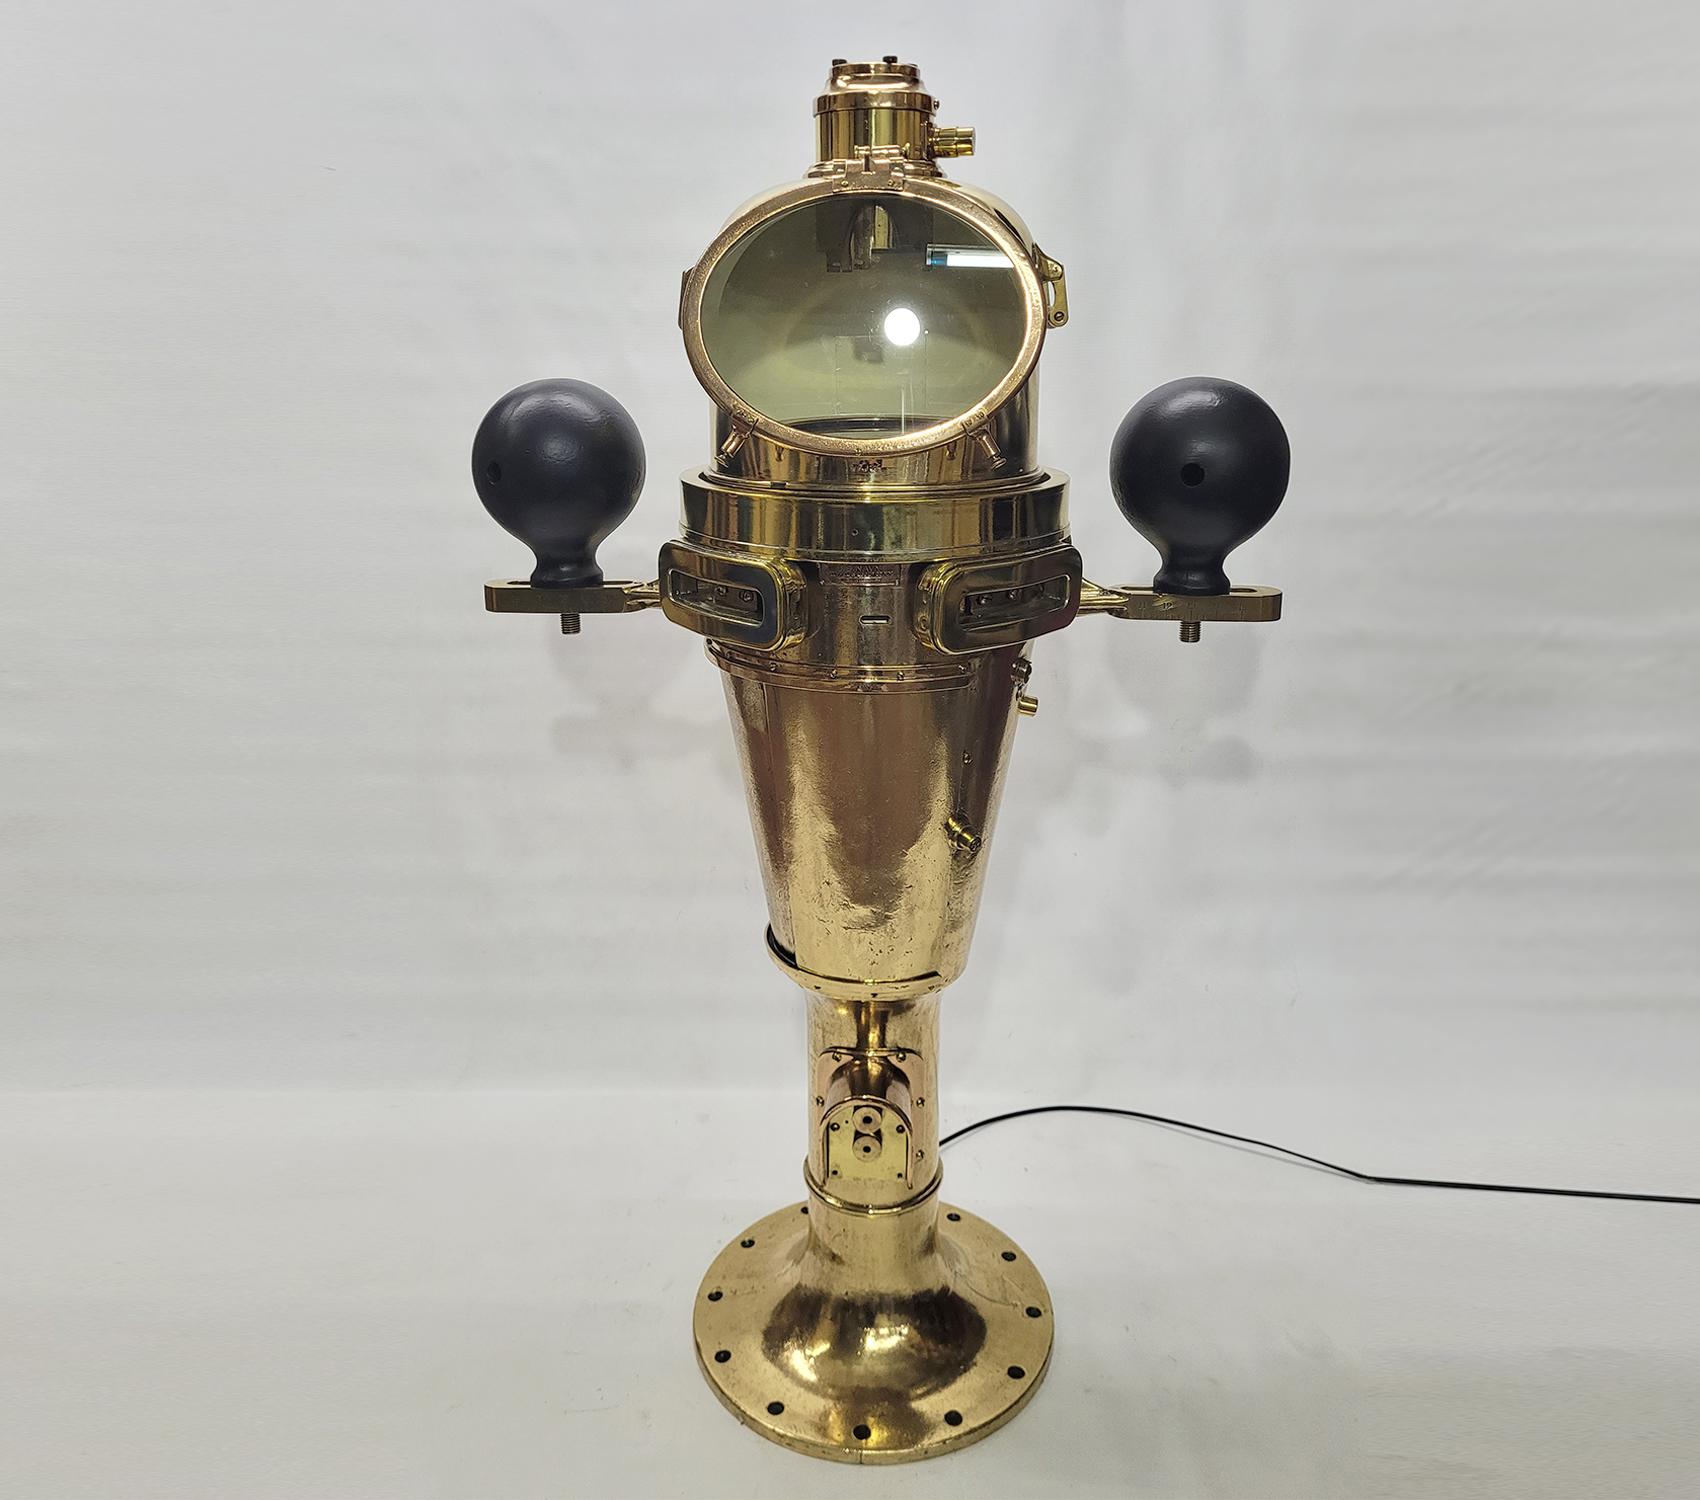 Spectacular solid brass ships binnacle by Keuffel and Esser Company of New York in 1918. Builders plate is marked type VII no 1200, Bureau of Navigation, US Navy and dated 1918. This is an outstanding piece, meticulously polished and lacquered. The